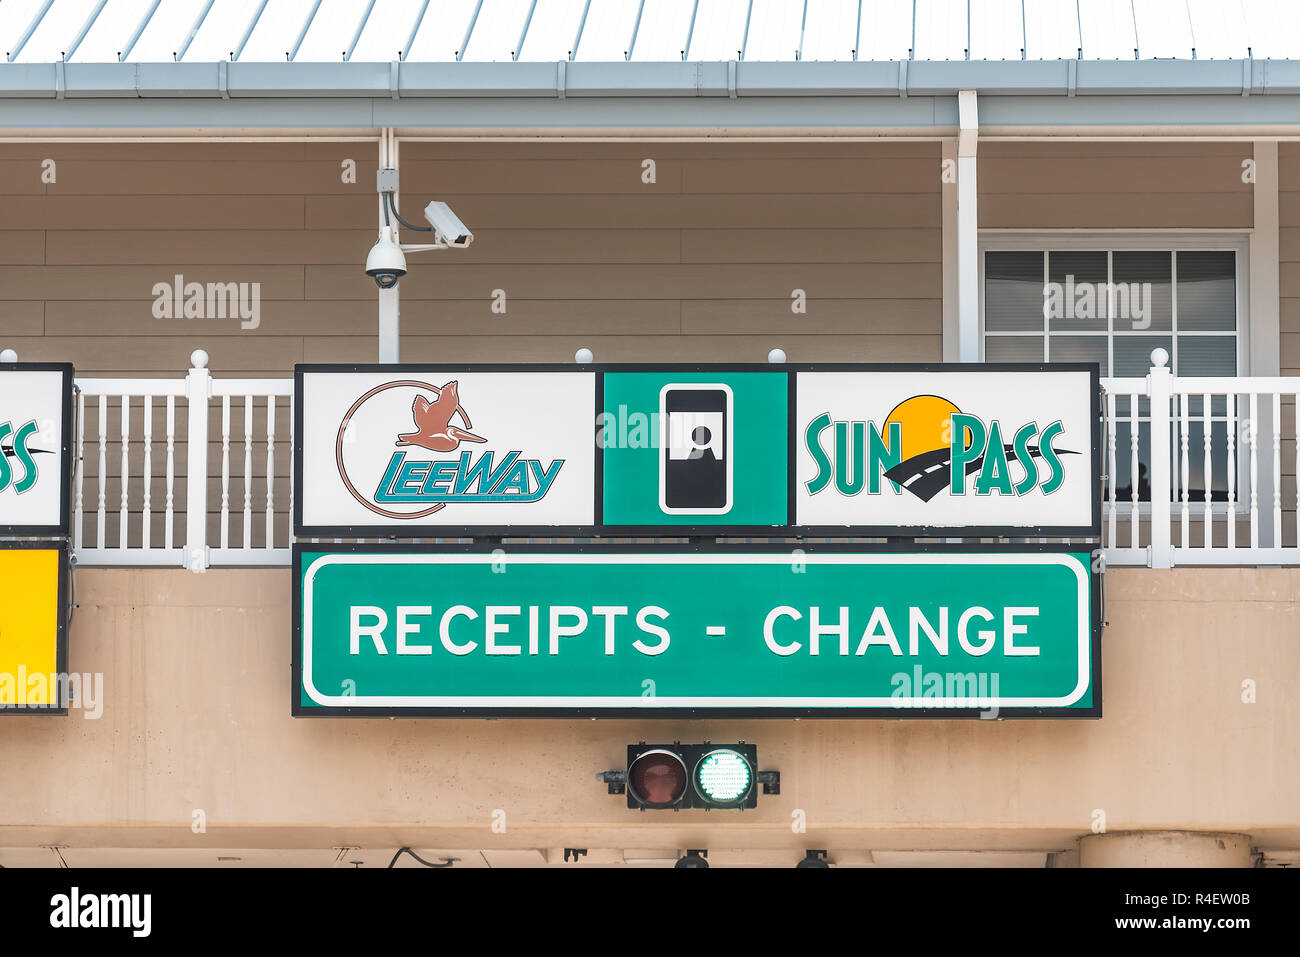 Fort Myers, USA - April 29, 2018: Road street highway green signs for Leeway in Florida with sunpass toll, receipts, change on Sanibel Island bridge c Stock Photo